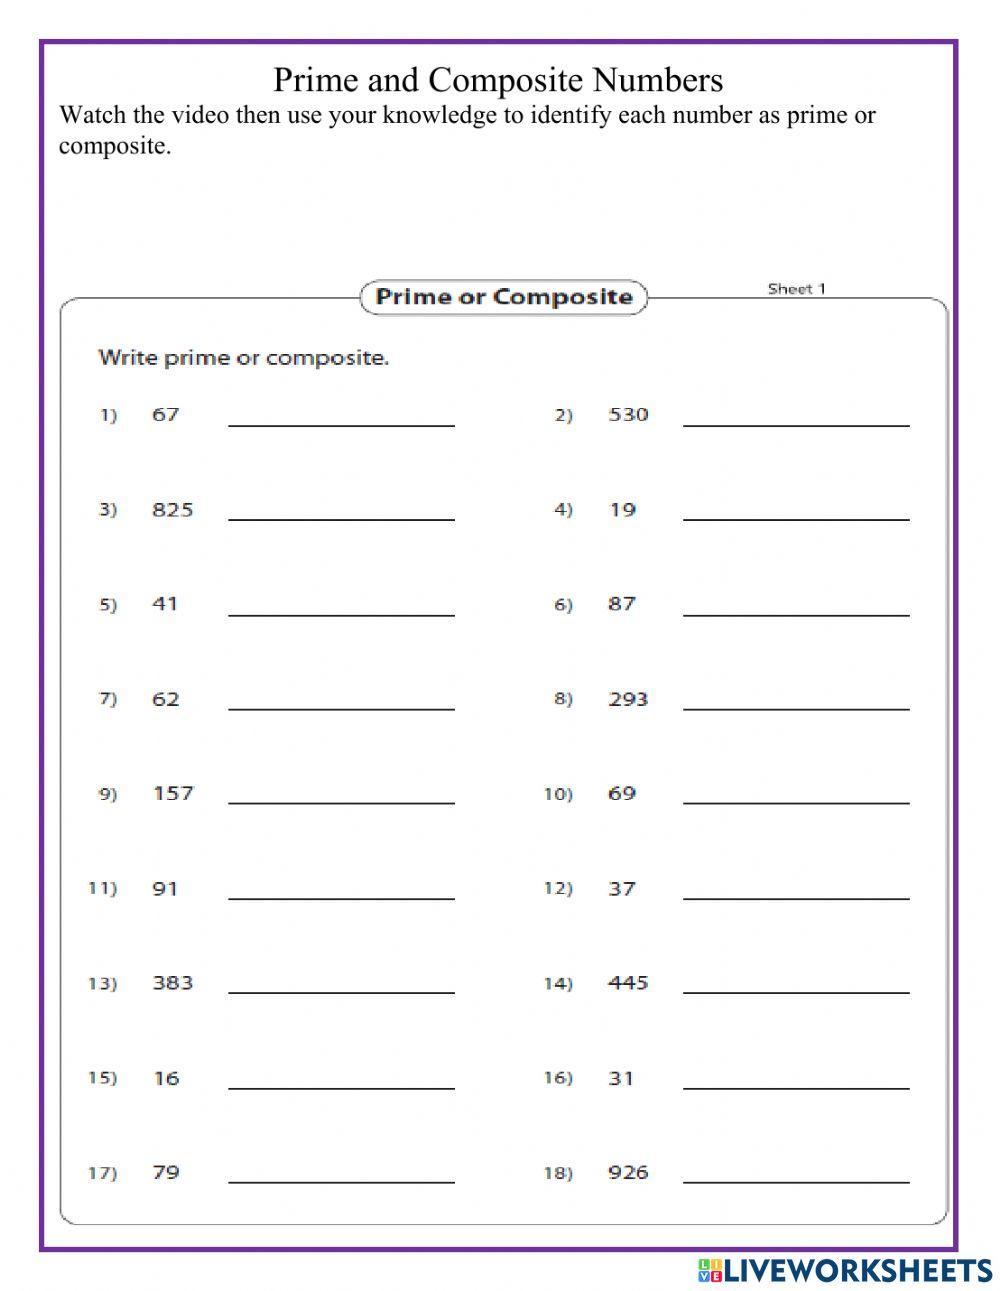 Prime and Composite Numbers worksheet for grades 4 and 5 | Live Worksheets